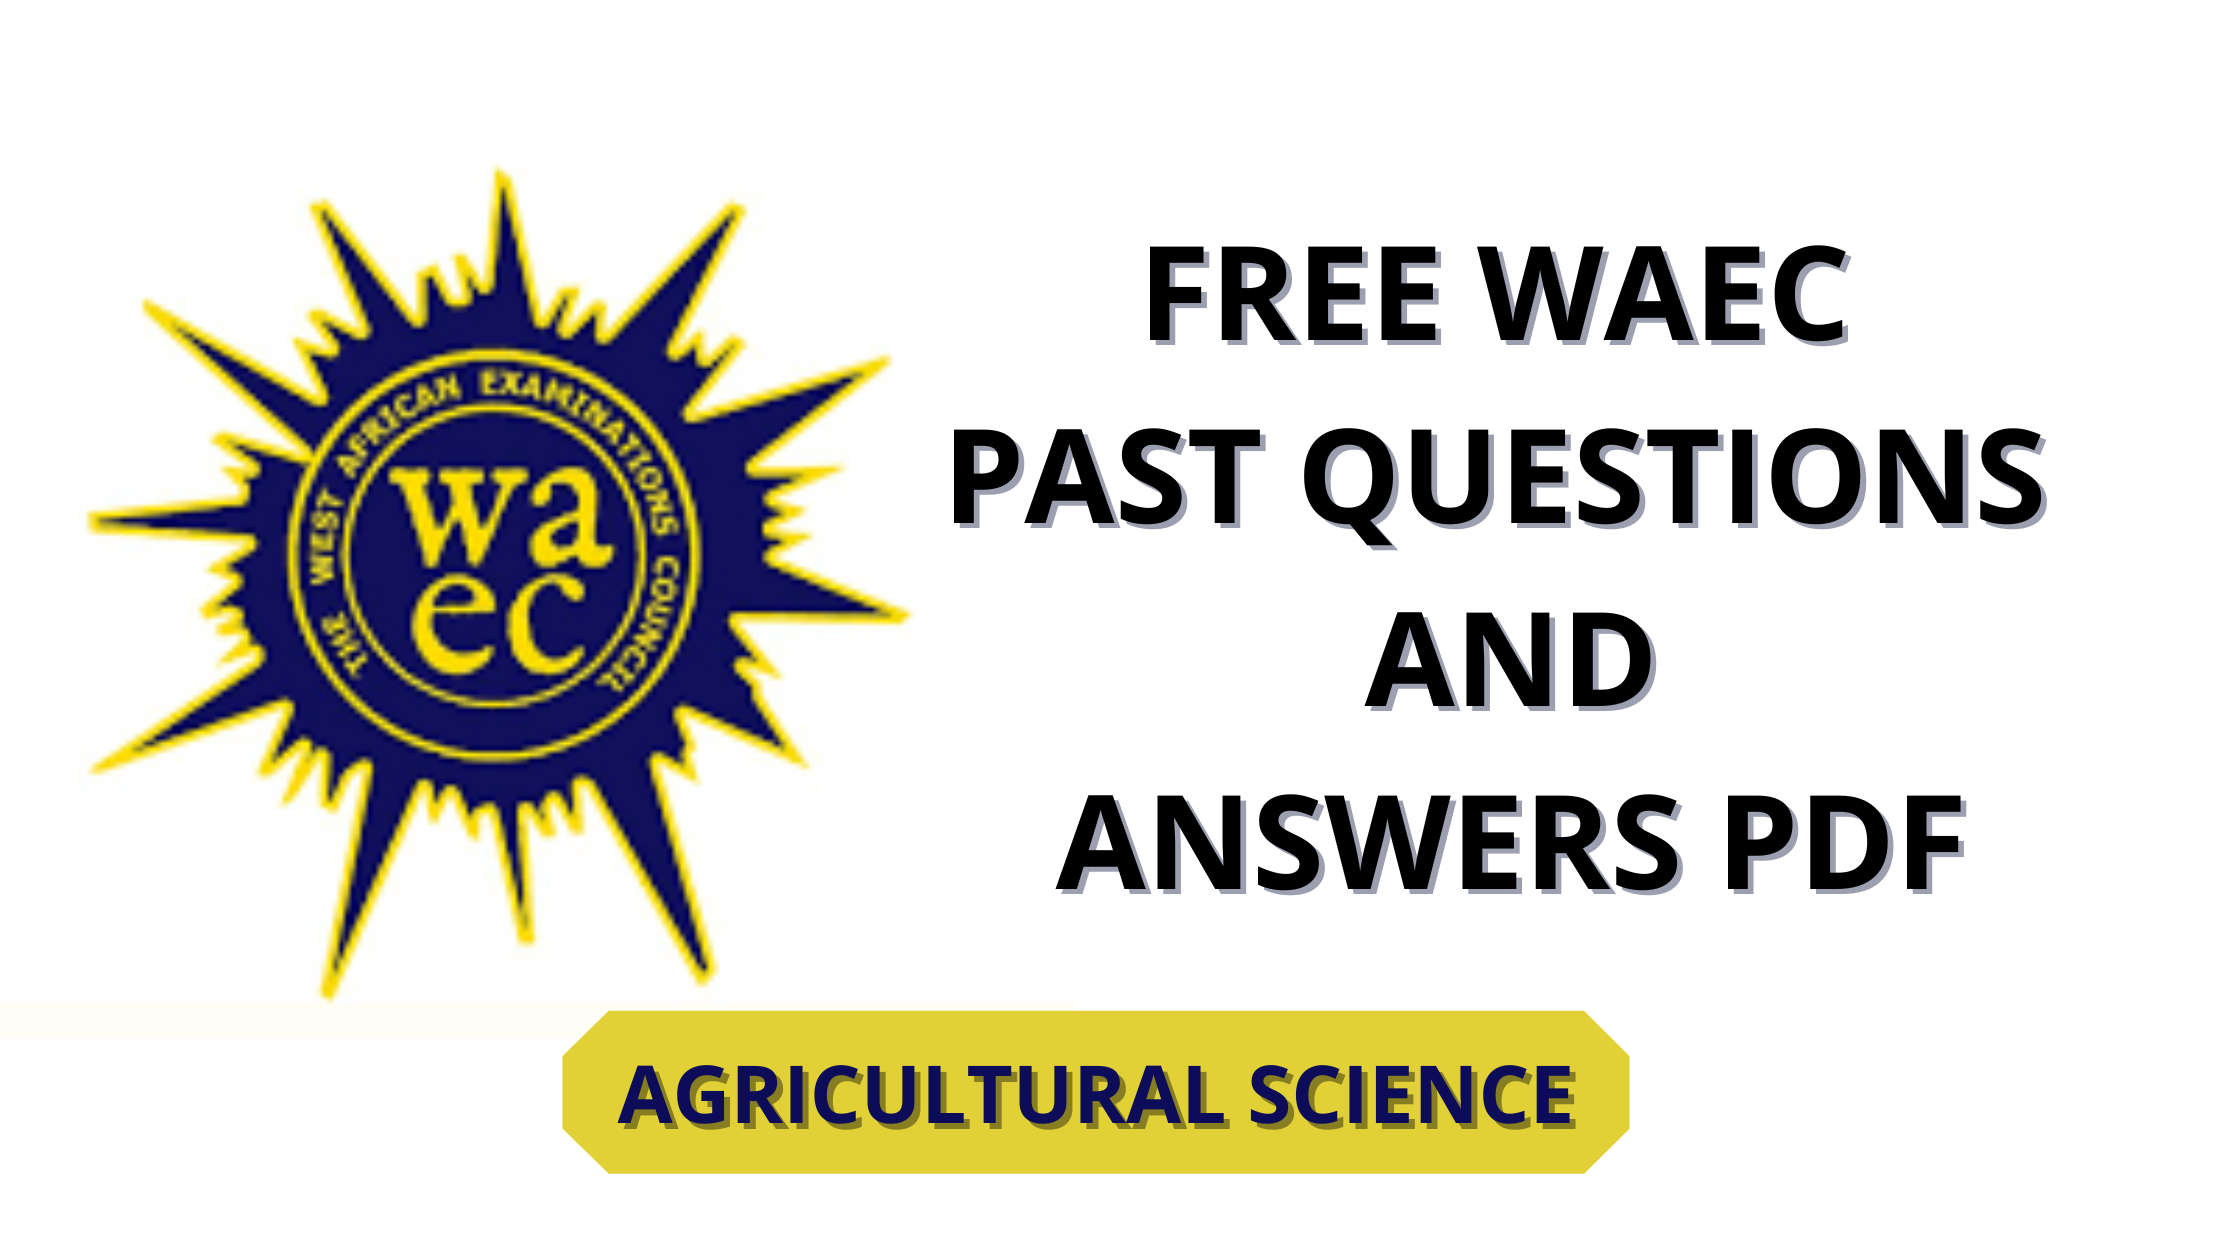 Agricultural Science (Agric) WAEC Past Questions FREE DOWNLOAD